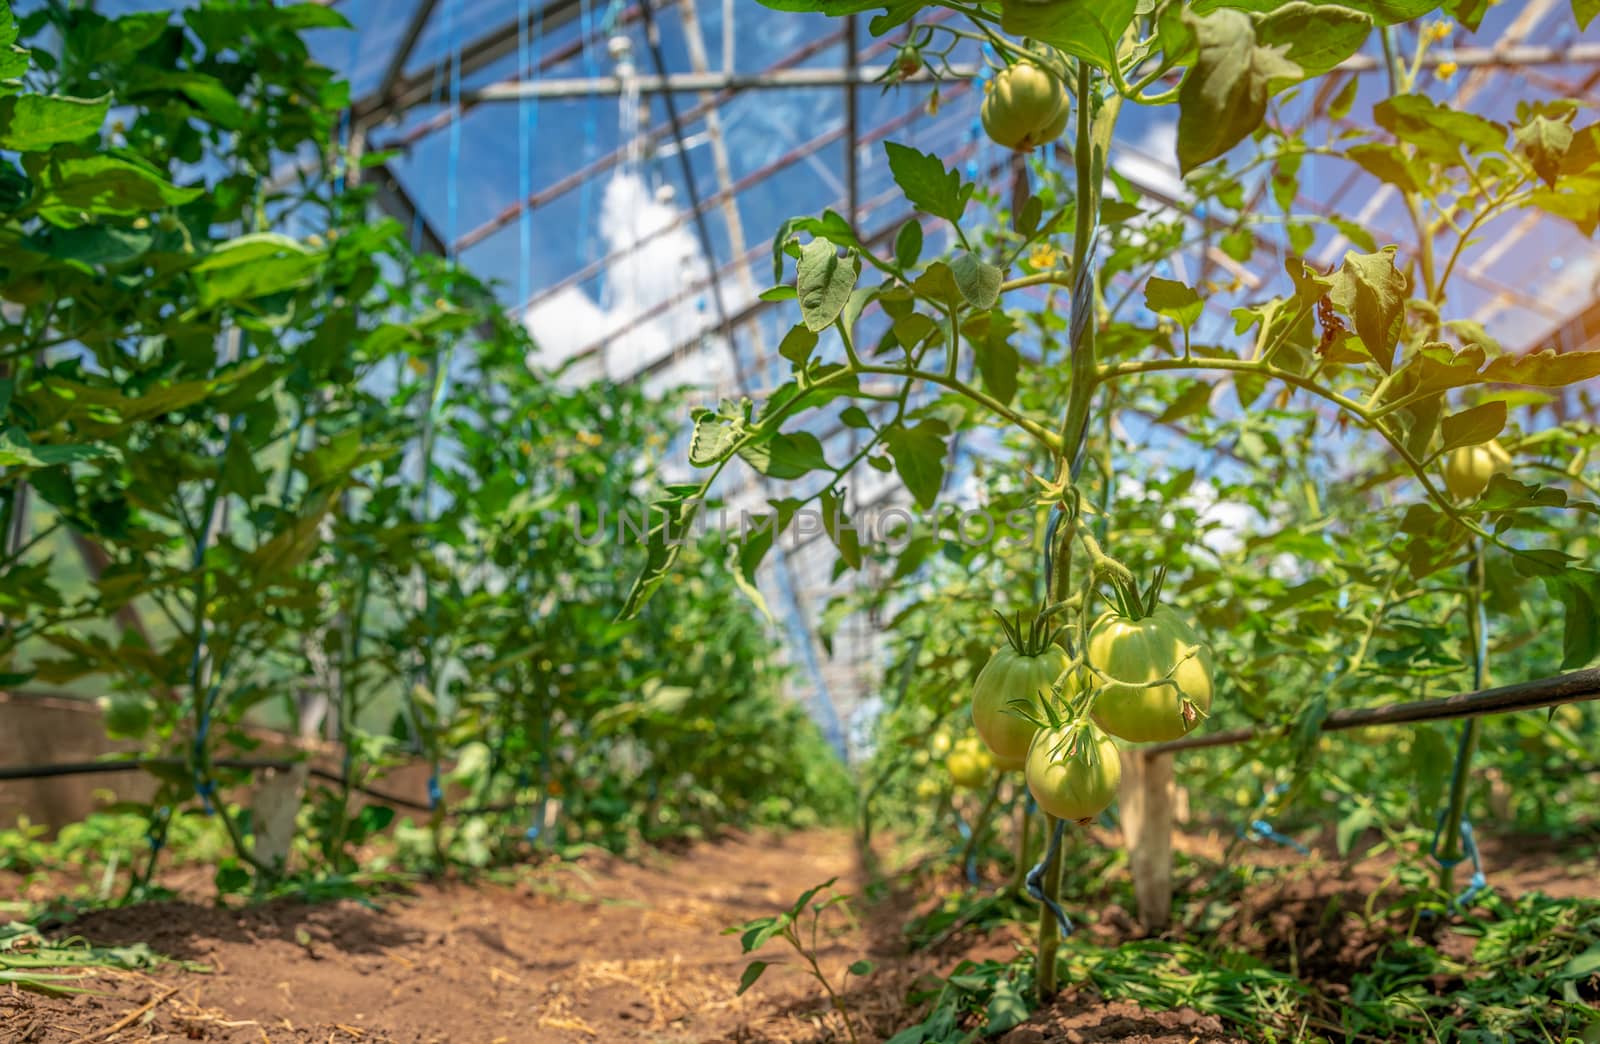 green tomatoes in a greenhouse ripen in the sun on the farm by Edophoto